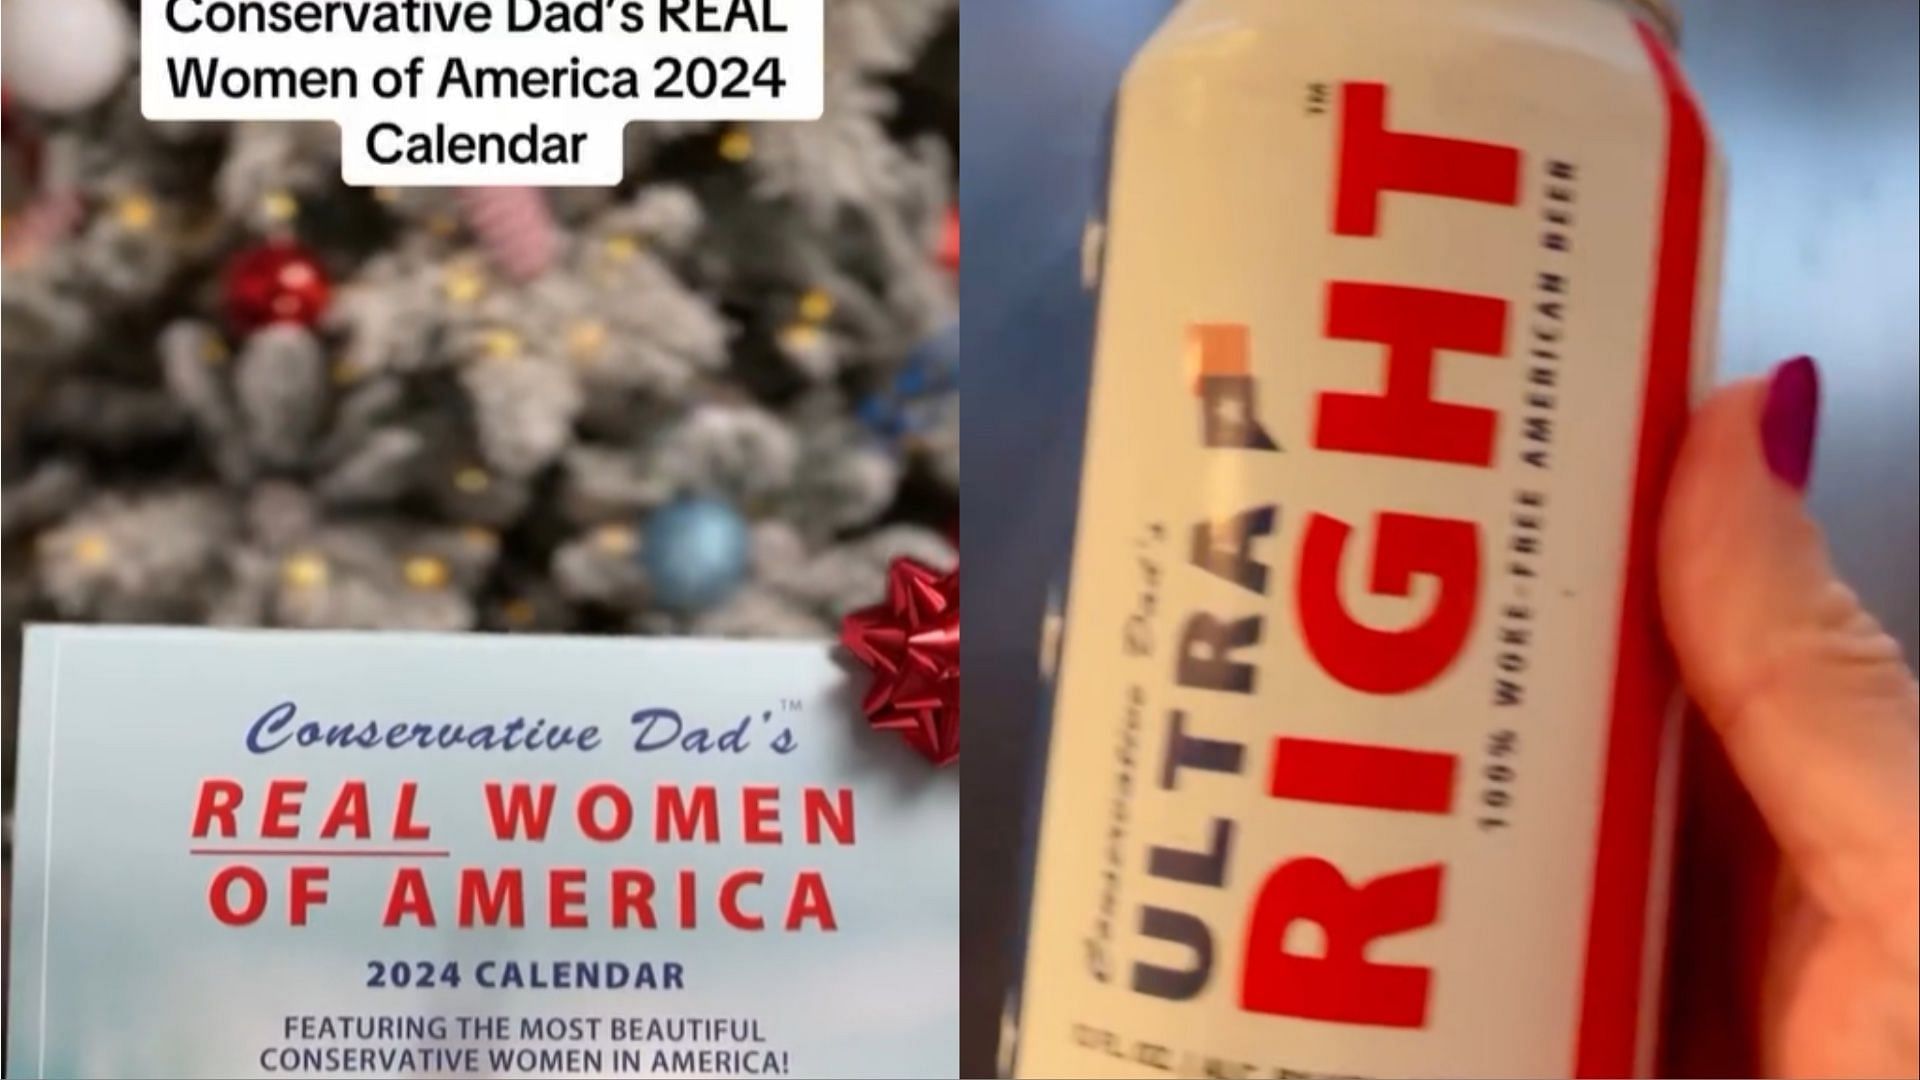 Conservative Dad Beer calendar Where to buy, price, models and all you